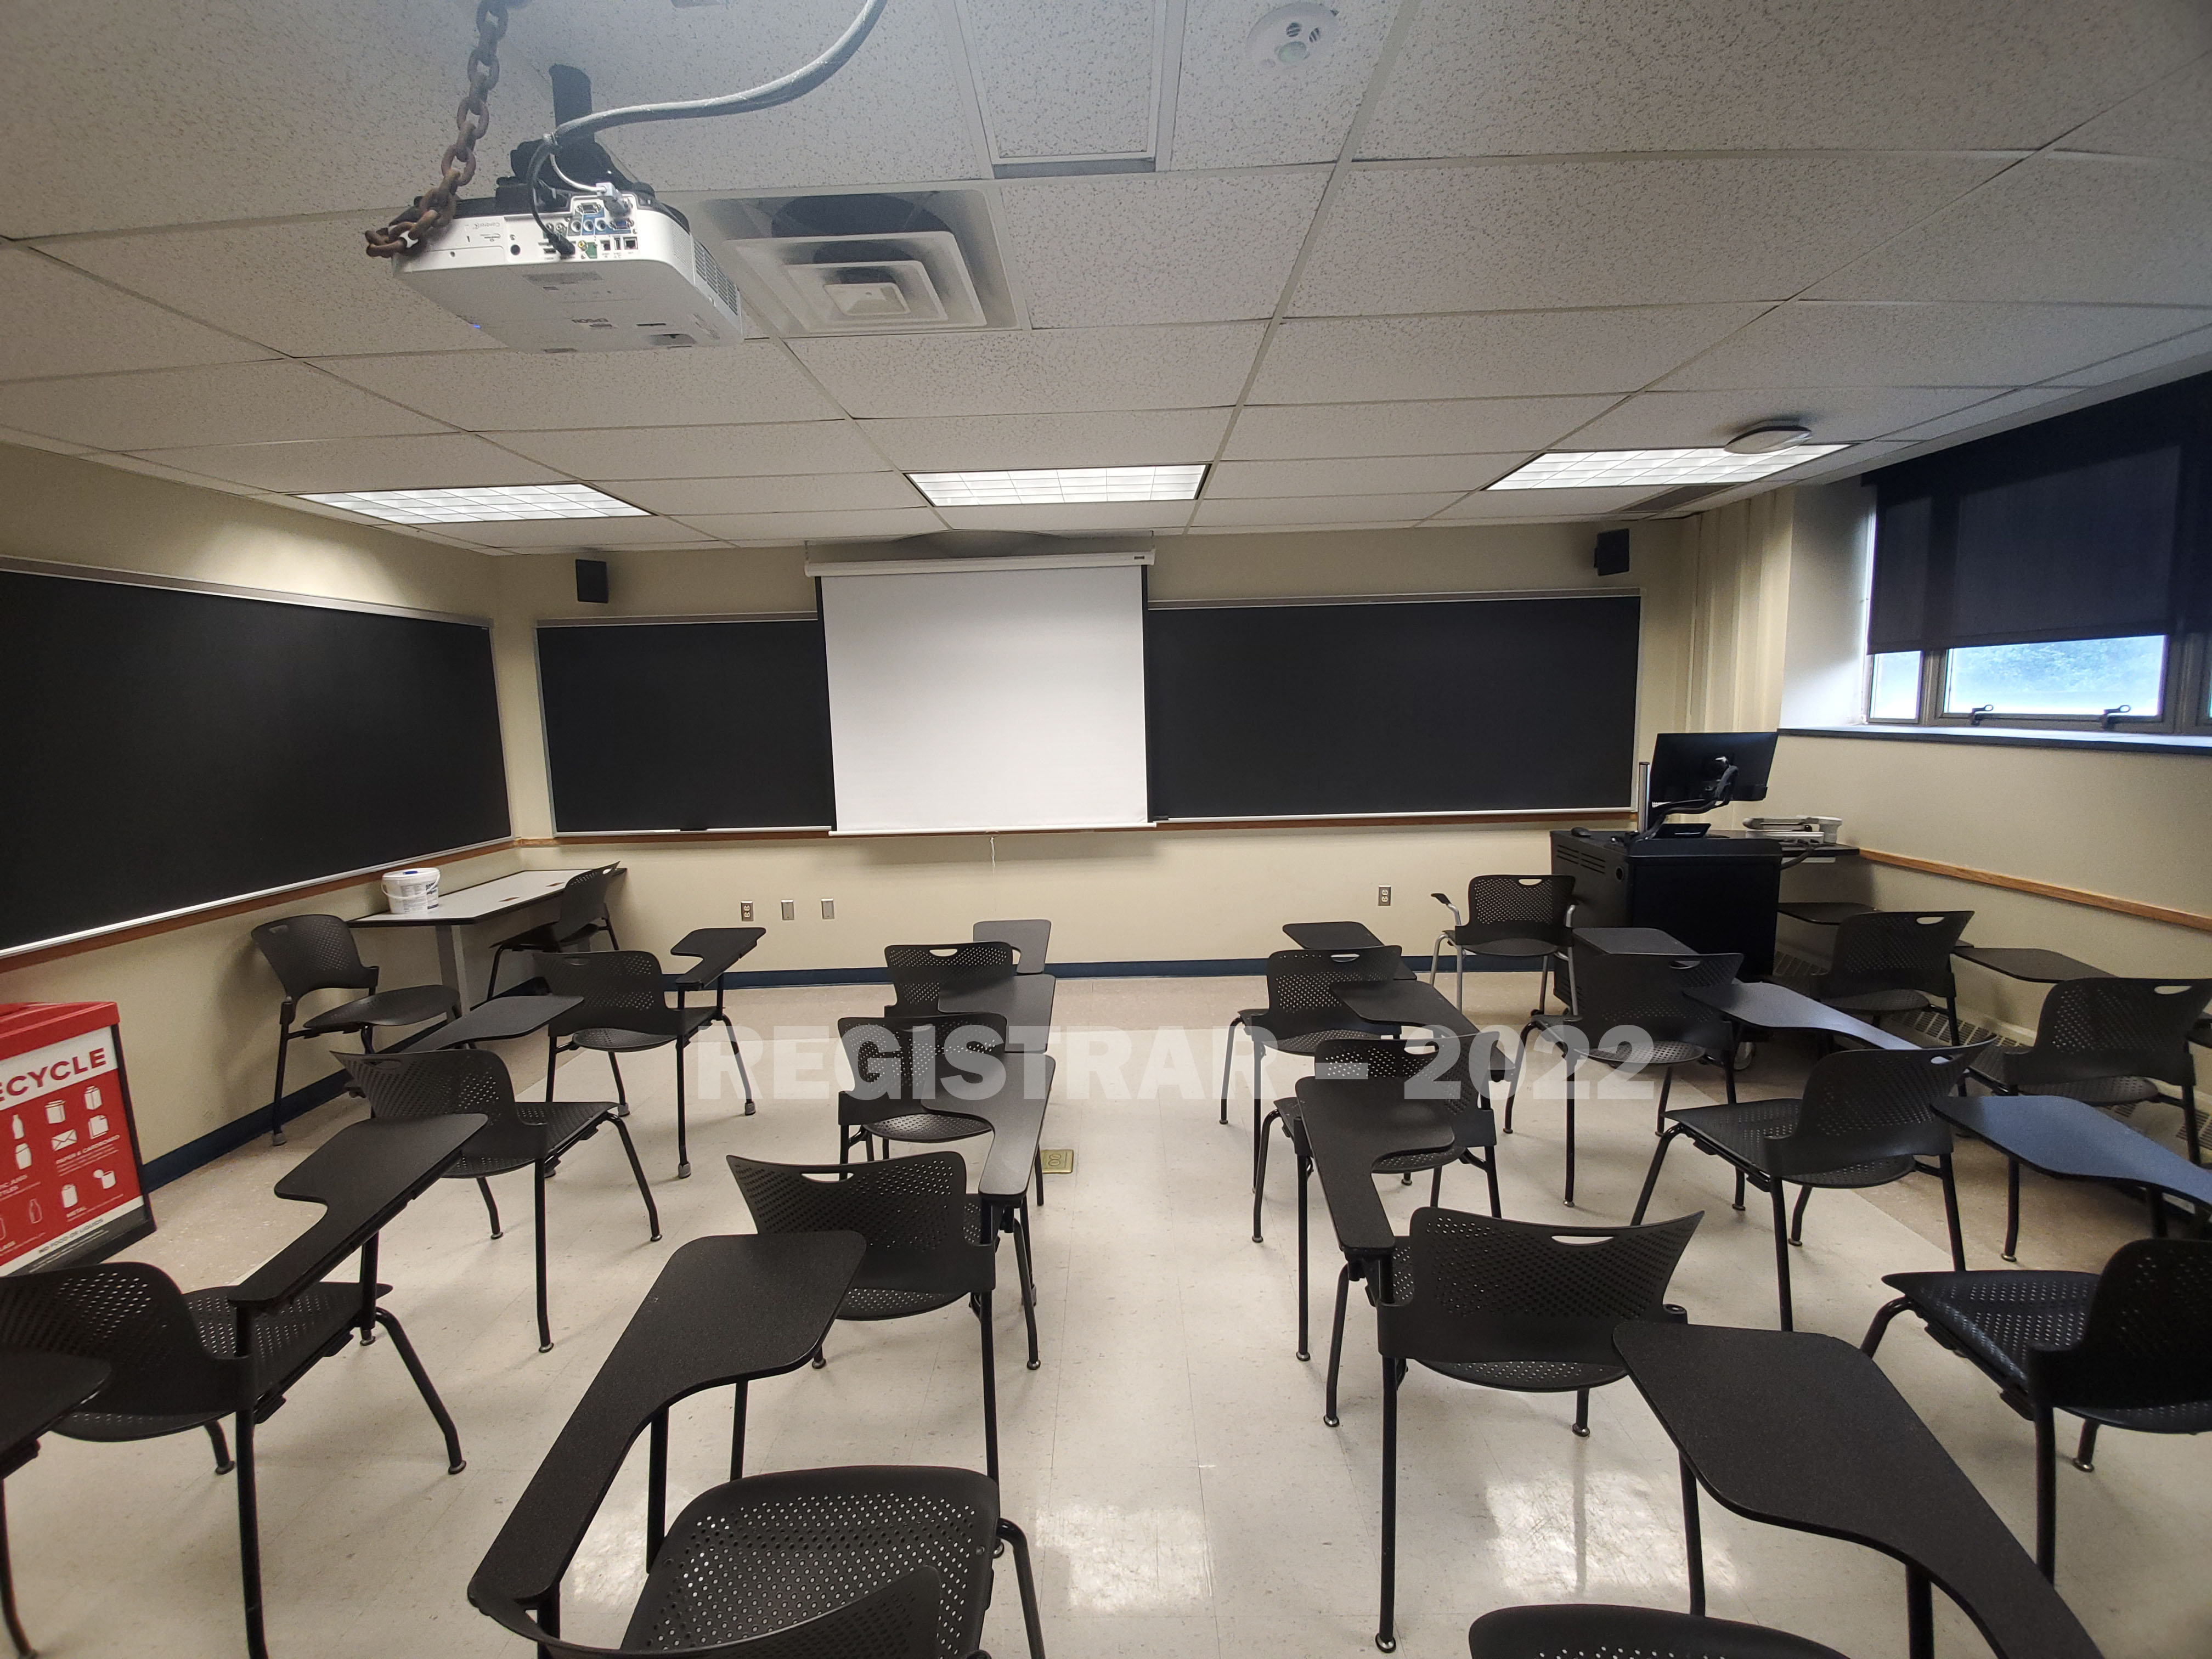 Enarson Classroom Building room 206 ultra wide angle view from the back of the room with projector screen down